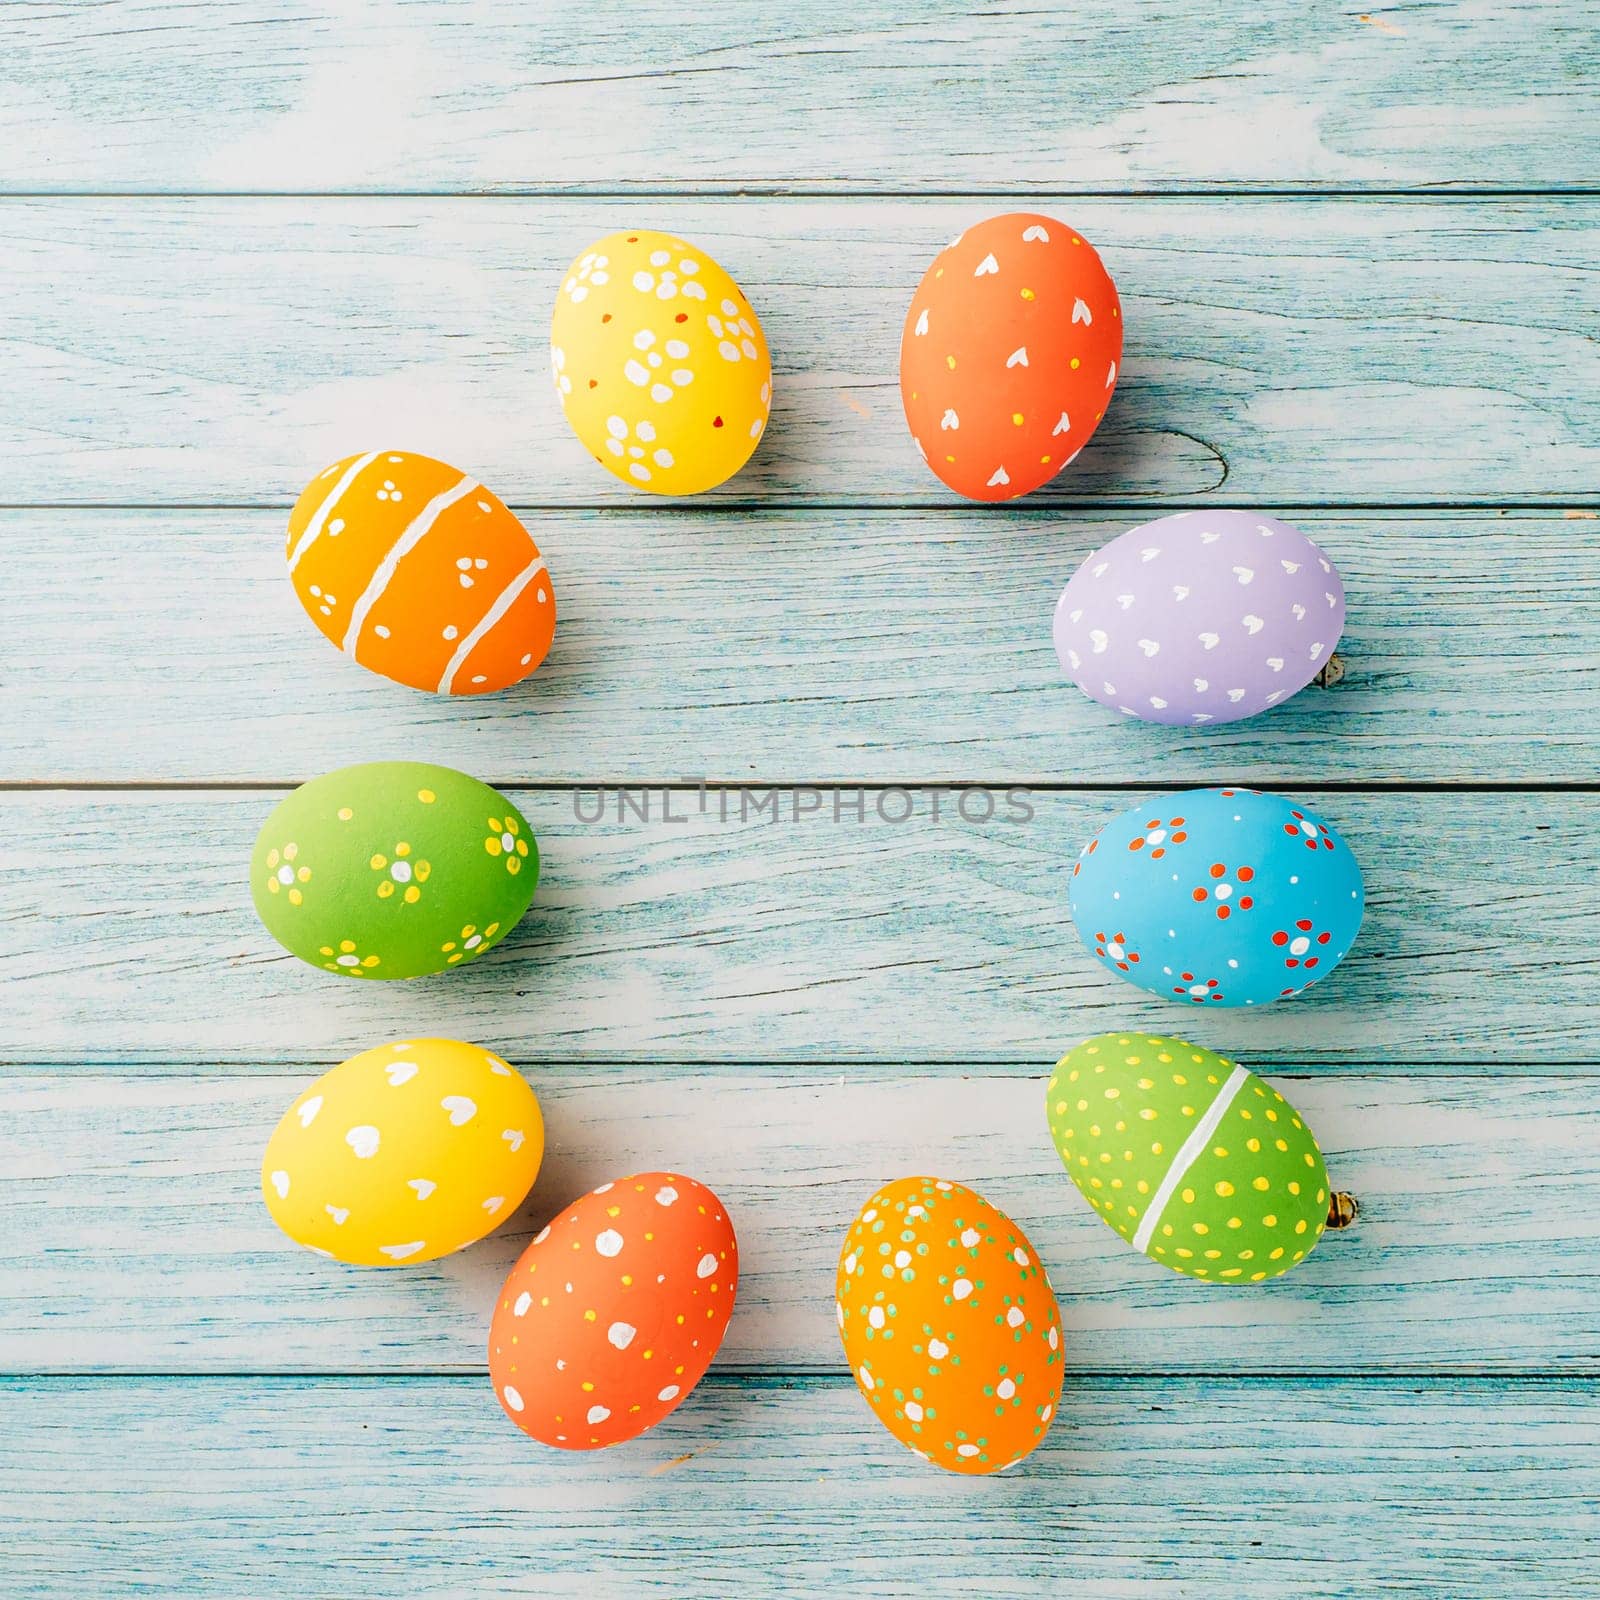 Happy Easter Day Concept by Sorapop